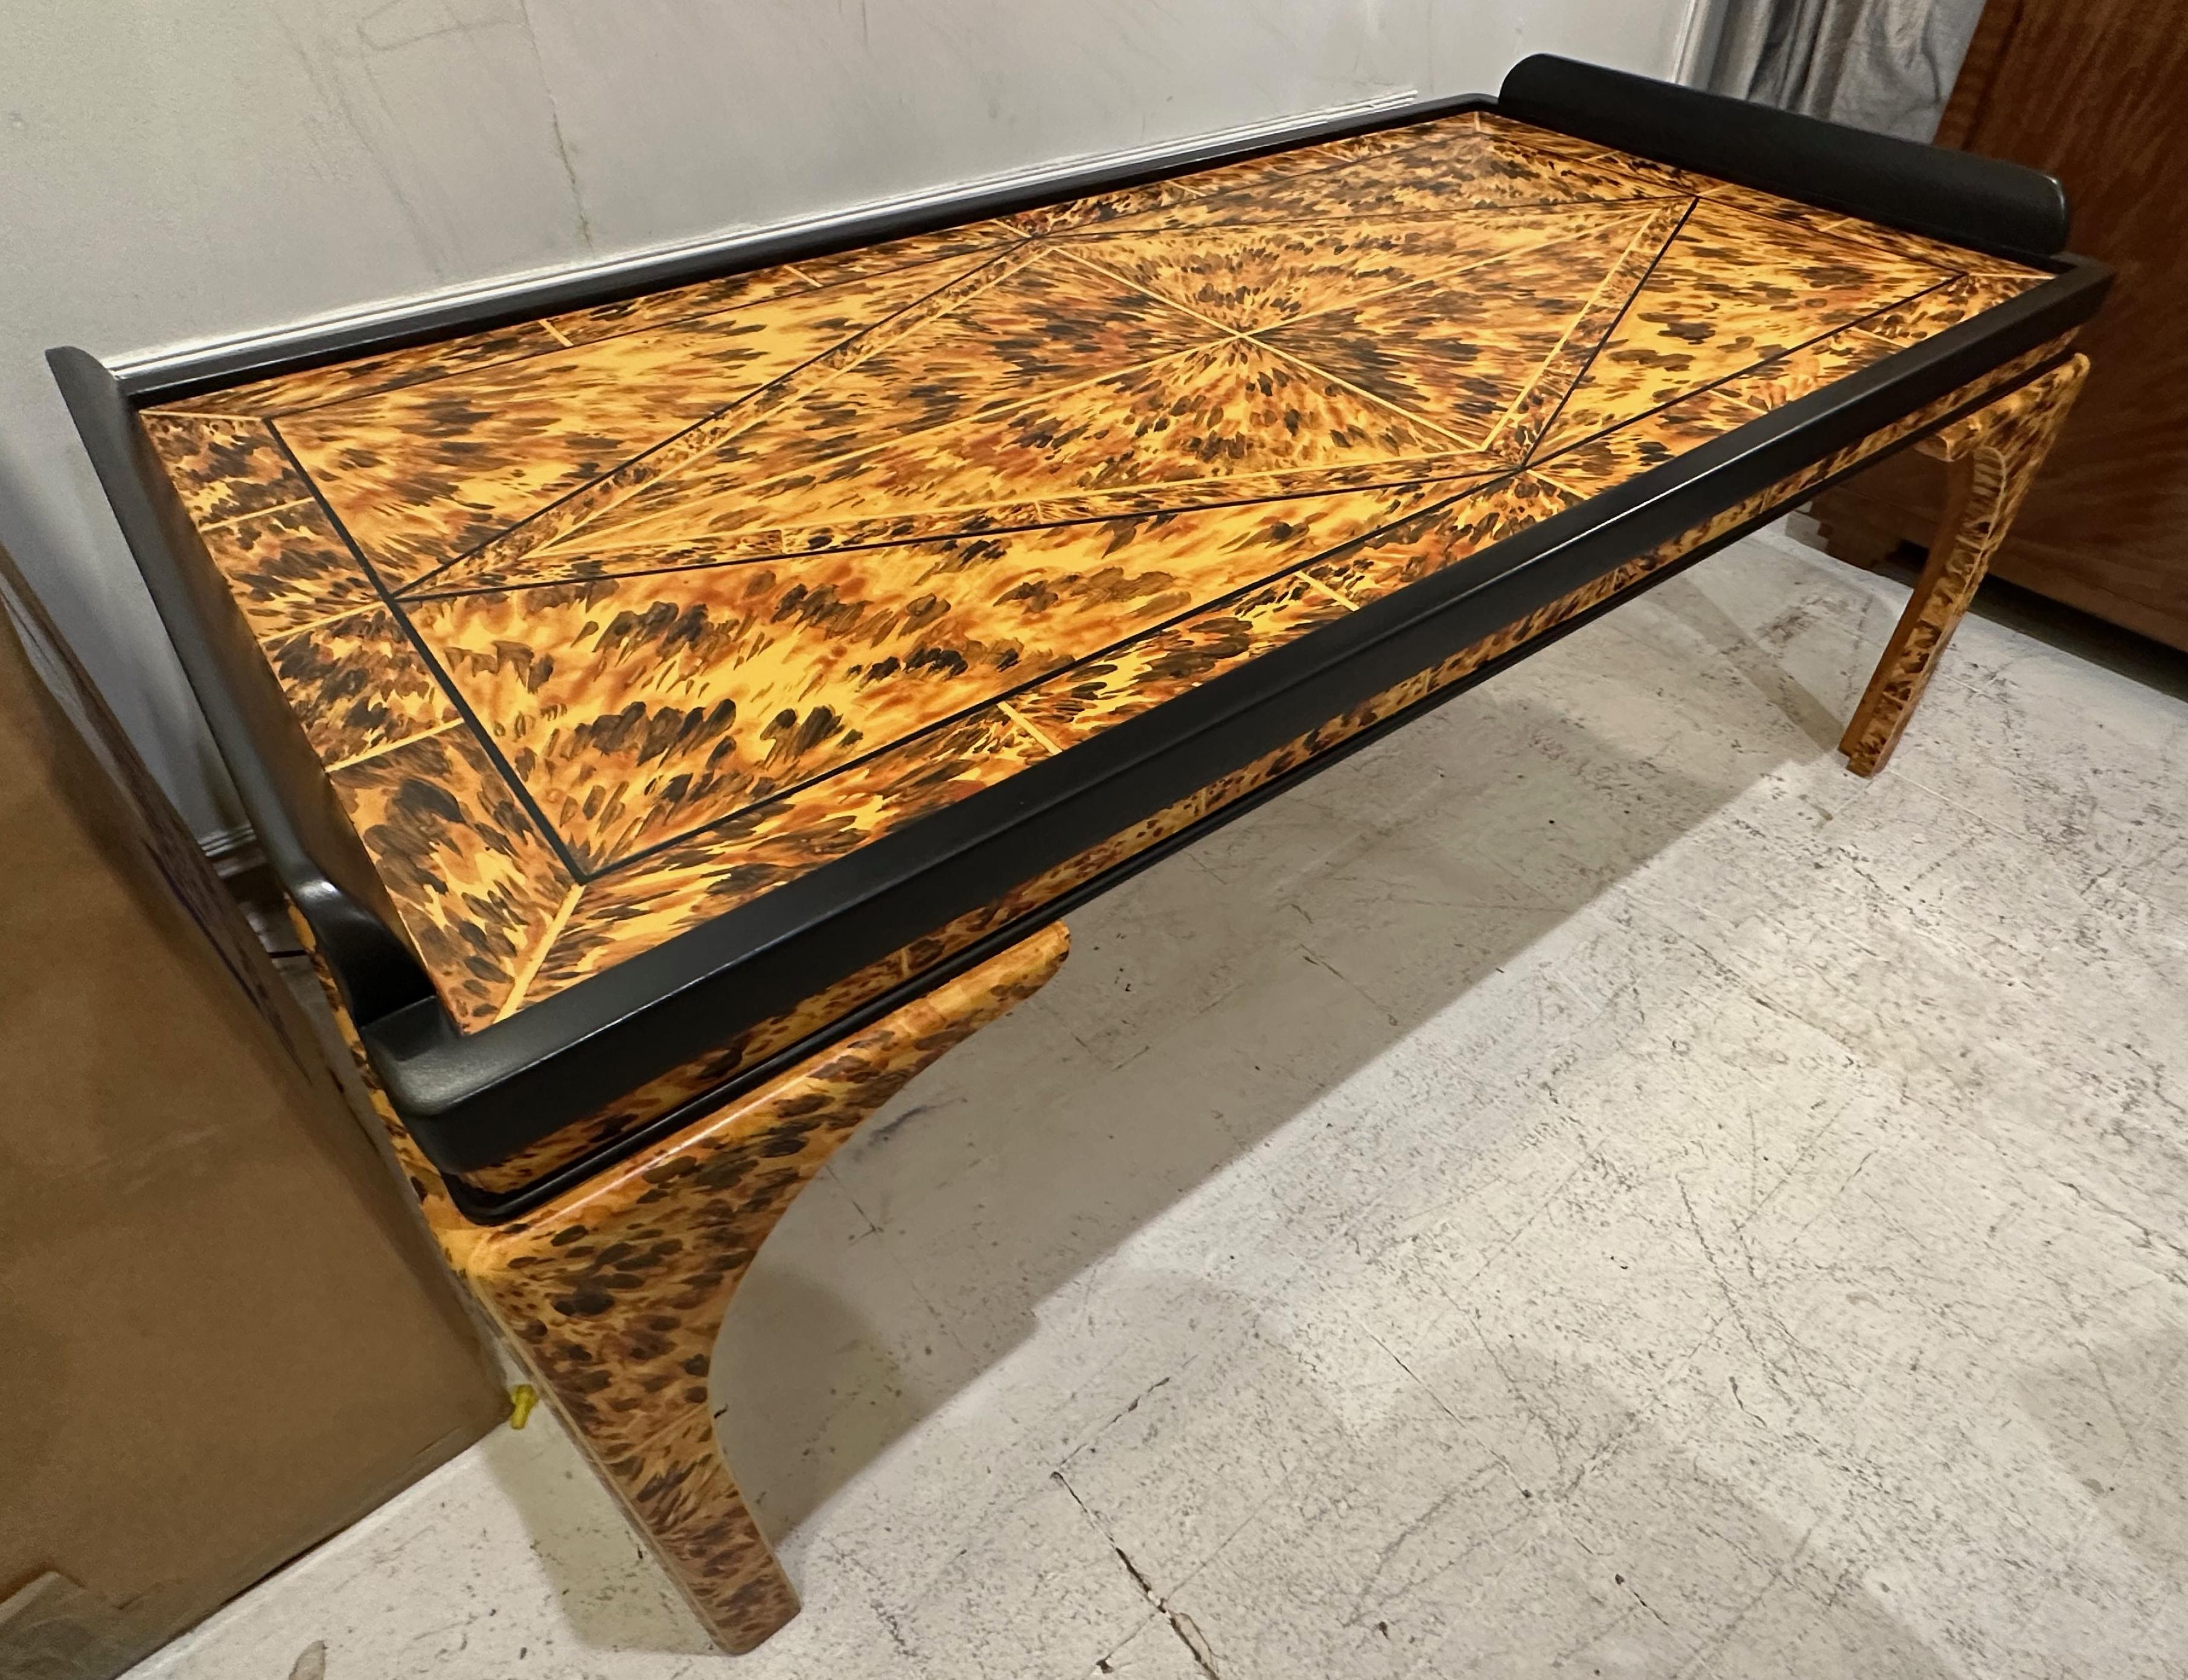 Custom Lacquered faux-tortoise coffee table.
This table is customizable with your choice of size, material and finish.
Estimated Production Time: 7-8 weeks